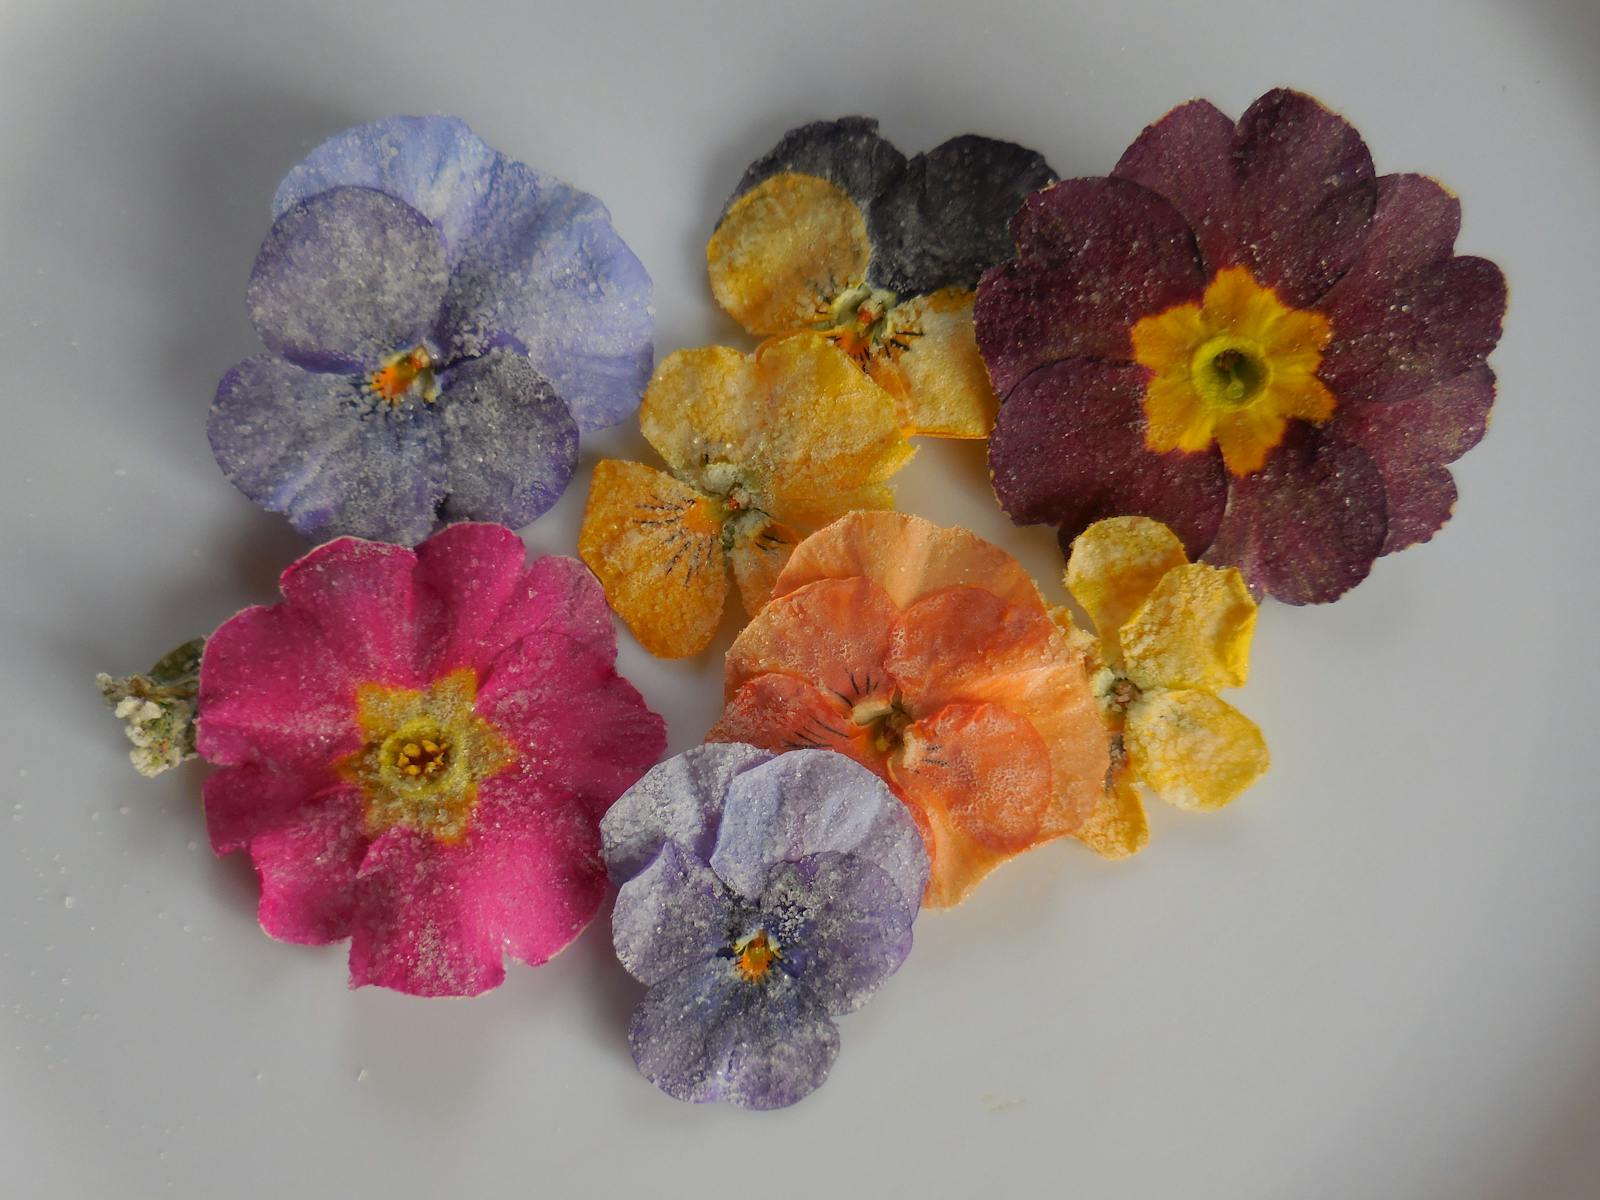 Crystallised edible polyanthus and pansies, colours ranging from lilac to red